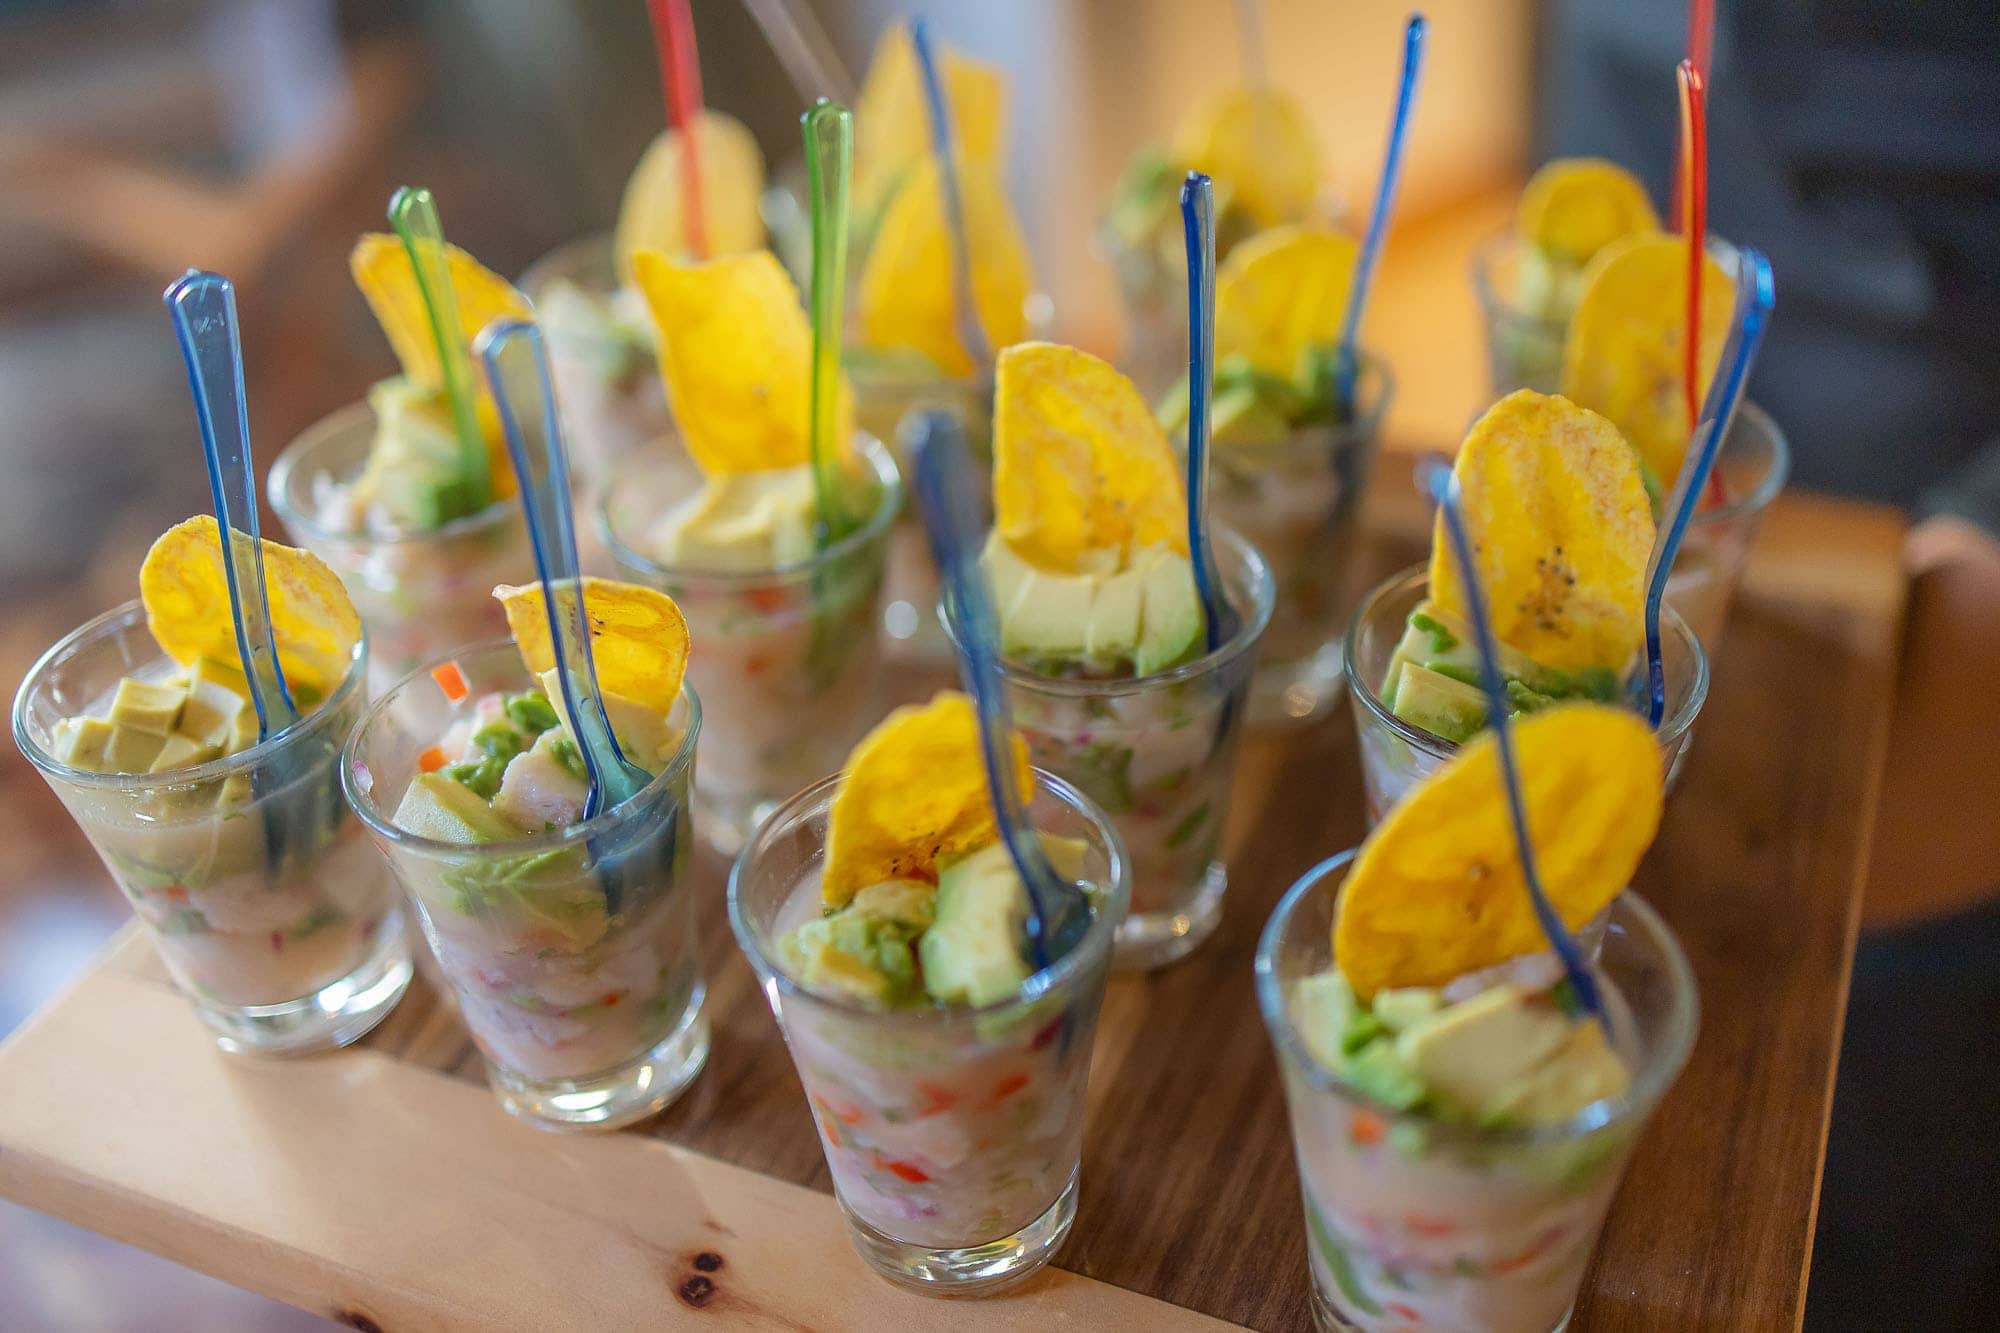 Little cups of ceviche, a nice touch